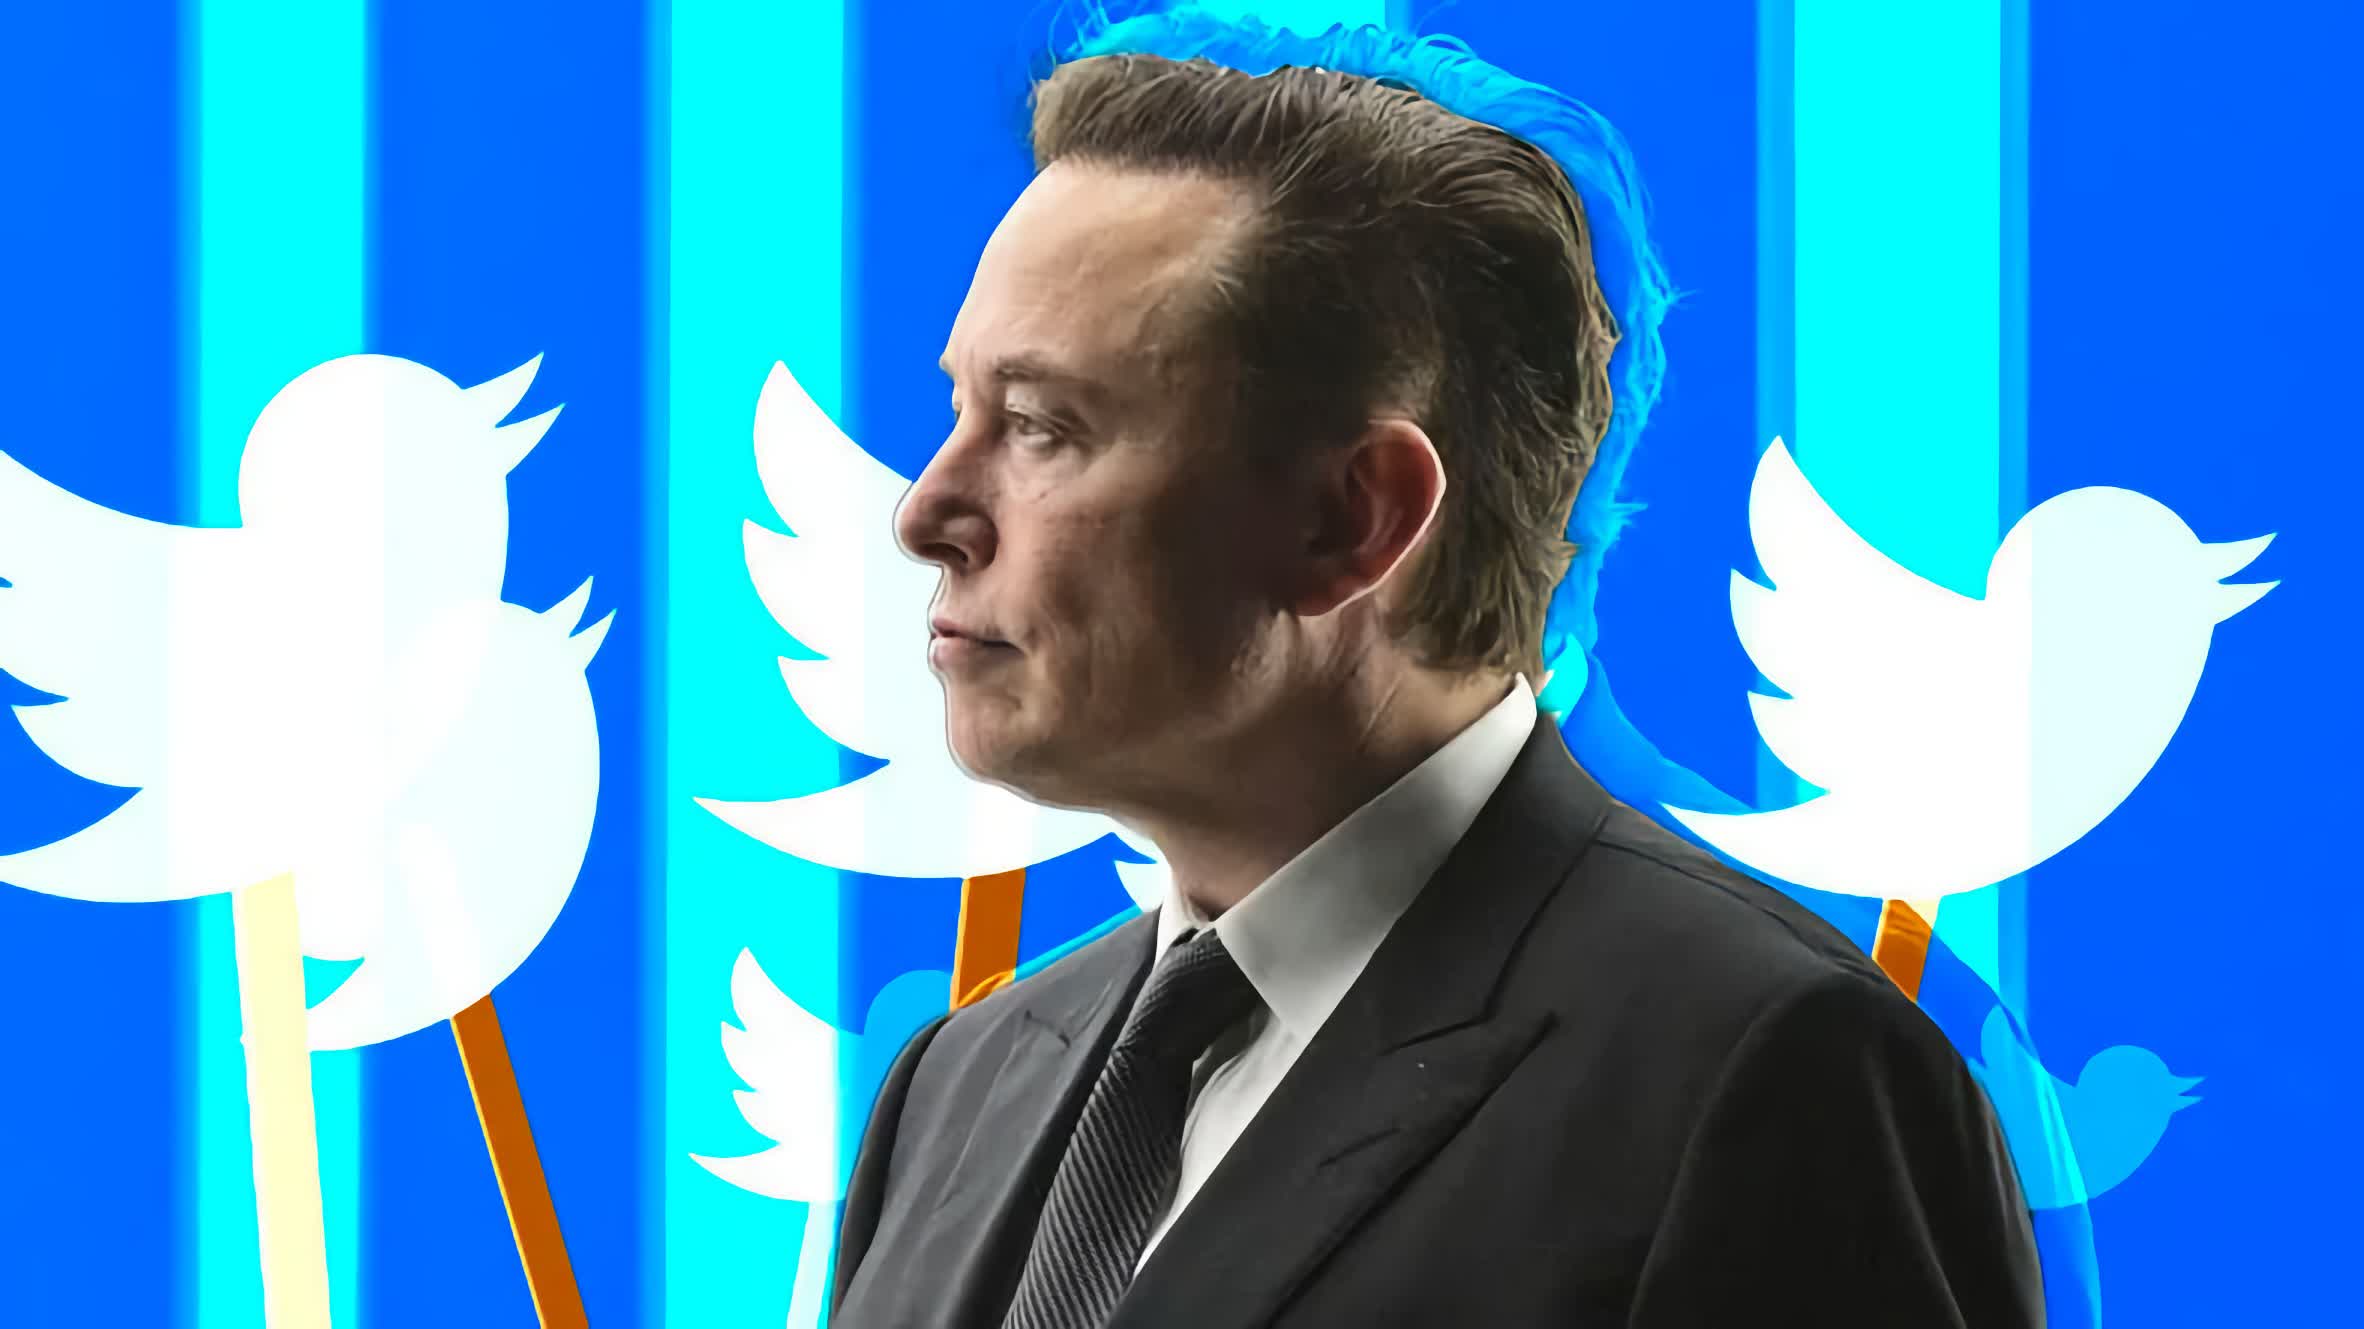 Morgan Stanley and others fund Elon Musk in $46.5 billion Twitter takeover bid